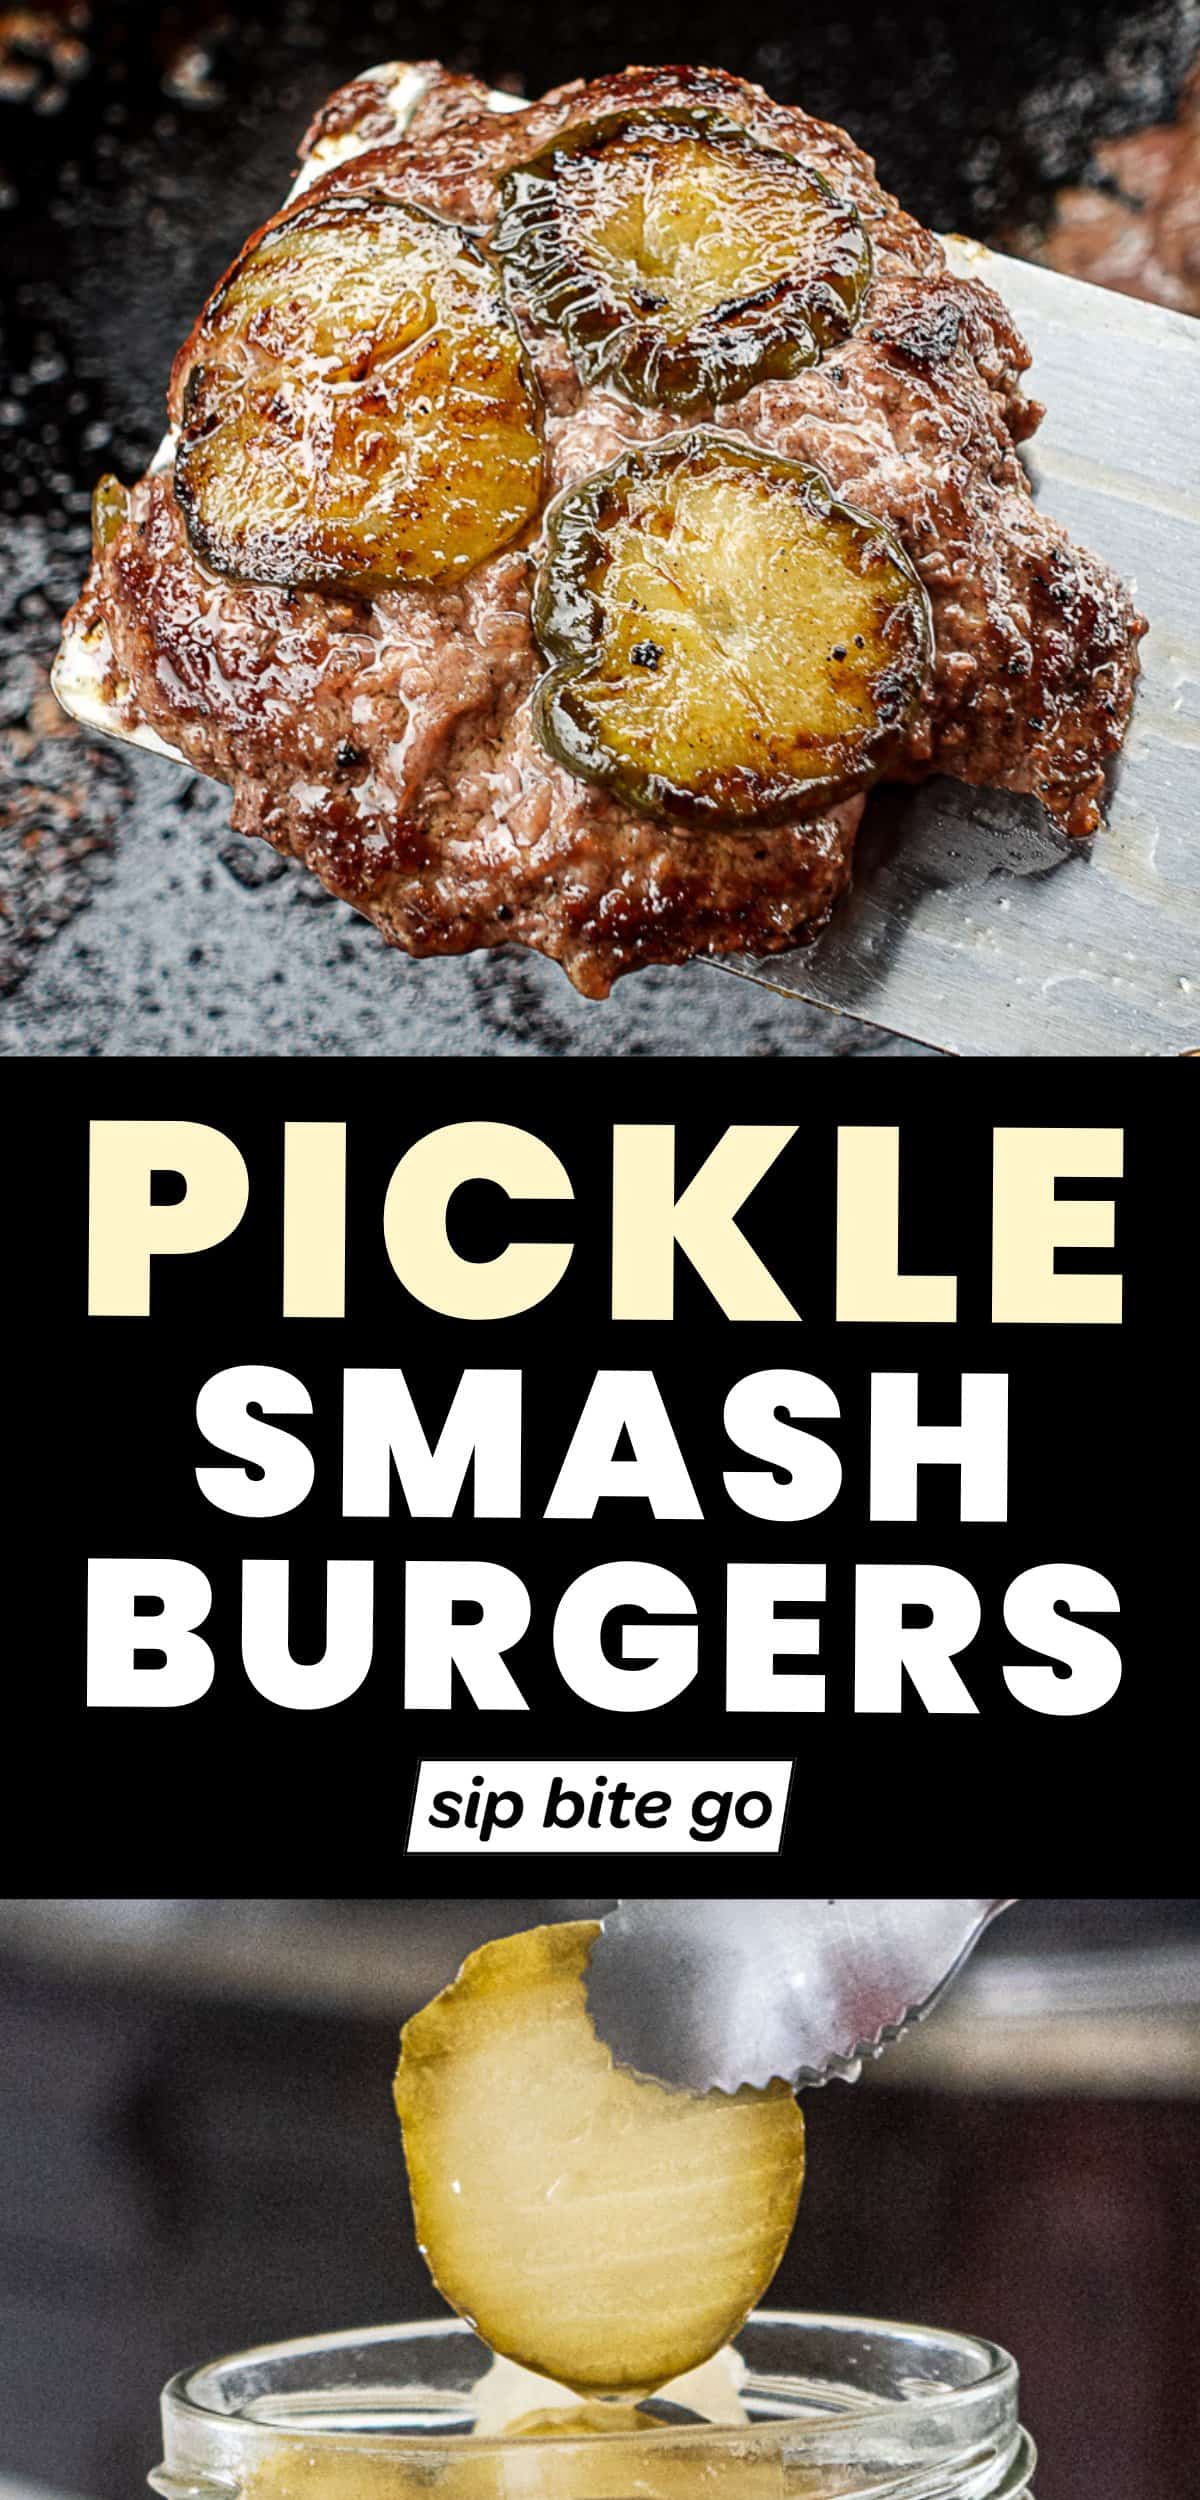 Griddled Pickle Smash Burgers with fresh pickle